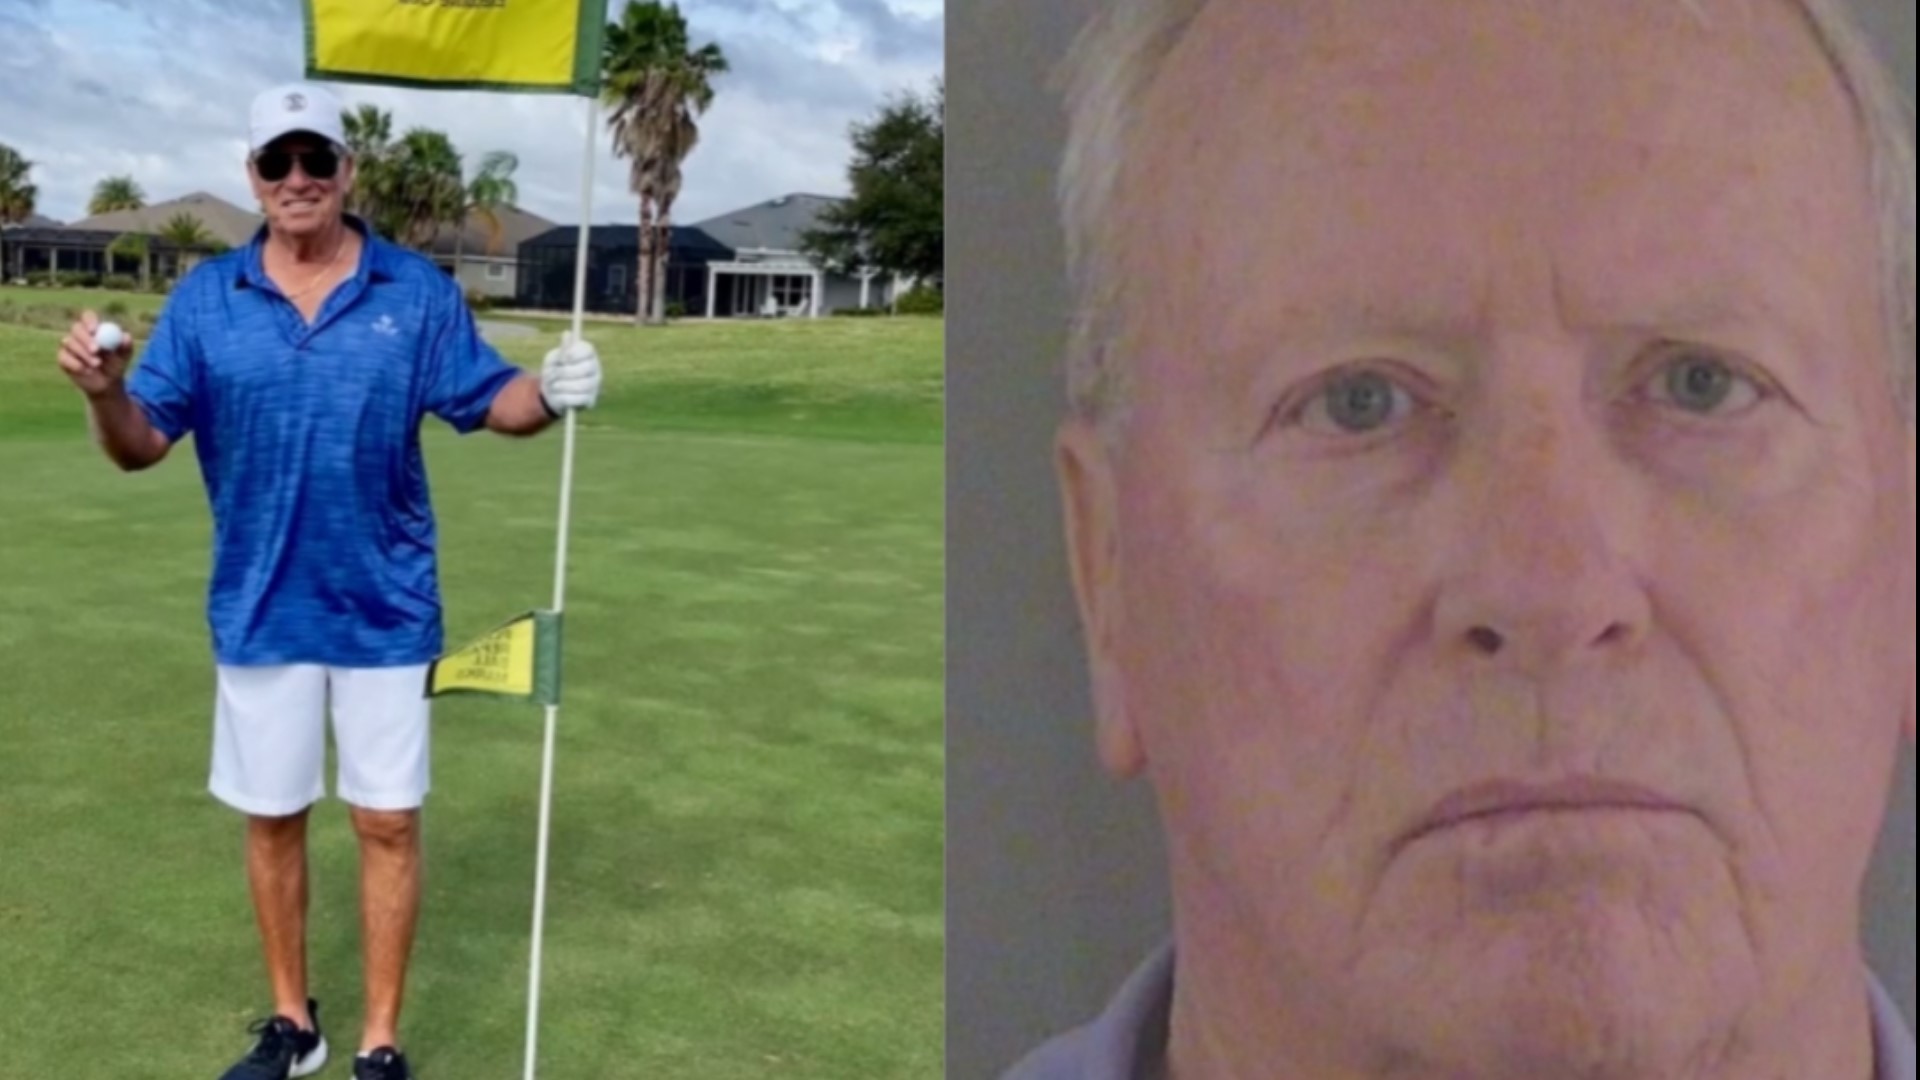 Police matched a photo of Robert Moore celebrating his hole-in-one to surveillance footage showing the suspect in the killing of an 87-year-old man